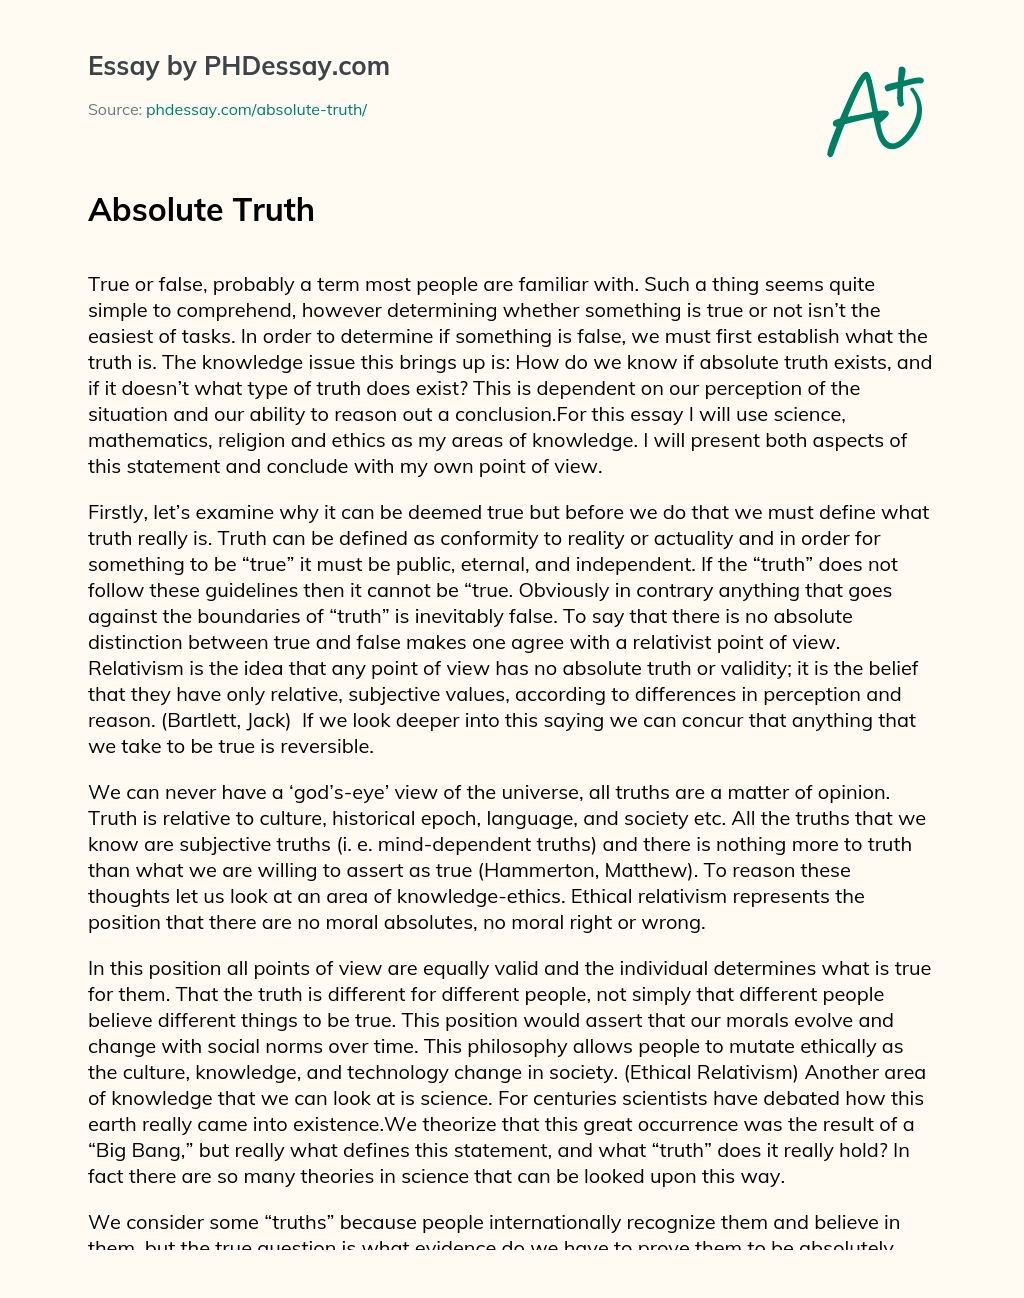 Реферат: Truth Absolute Understanding Essay Research Paper Absolute